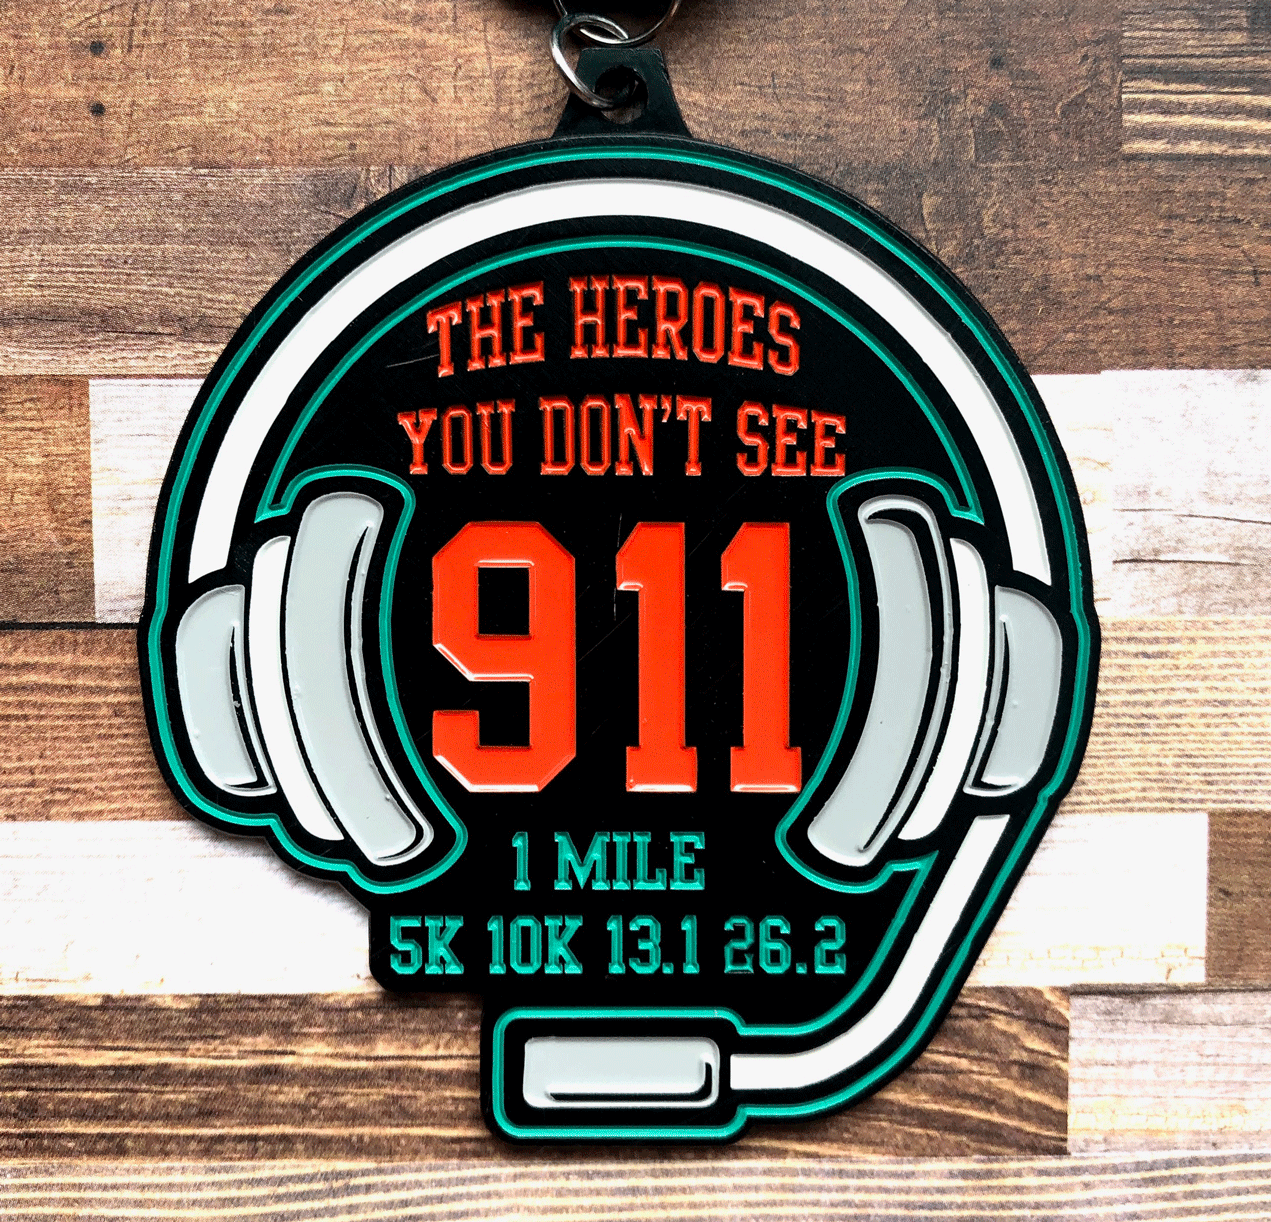 Only $9! The Heroes You Don't See 1 M 5K 10K 13.1 26.2 -Phoenix